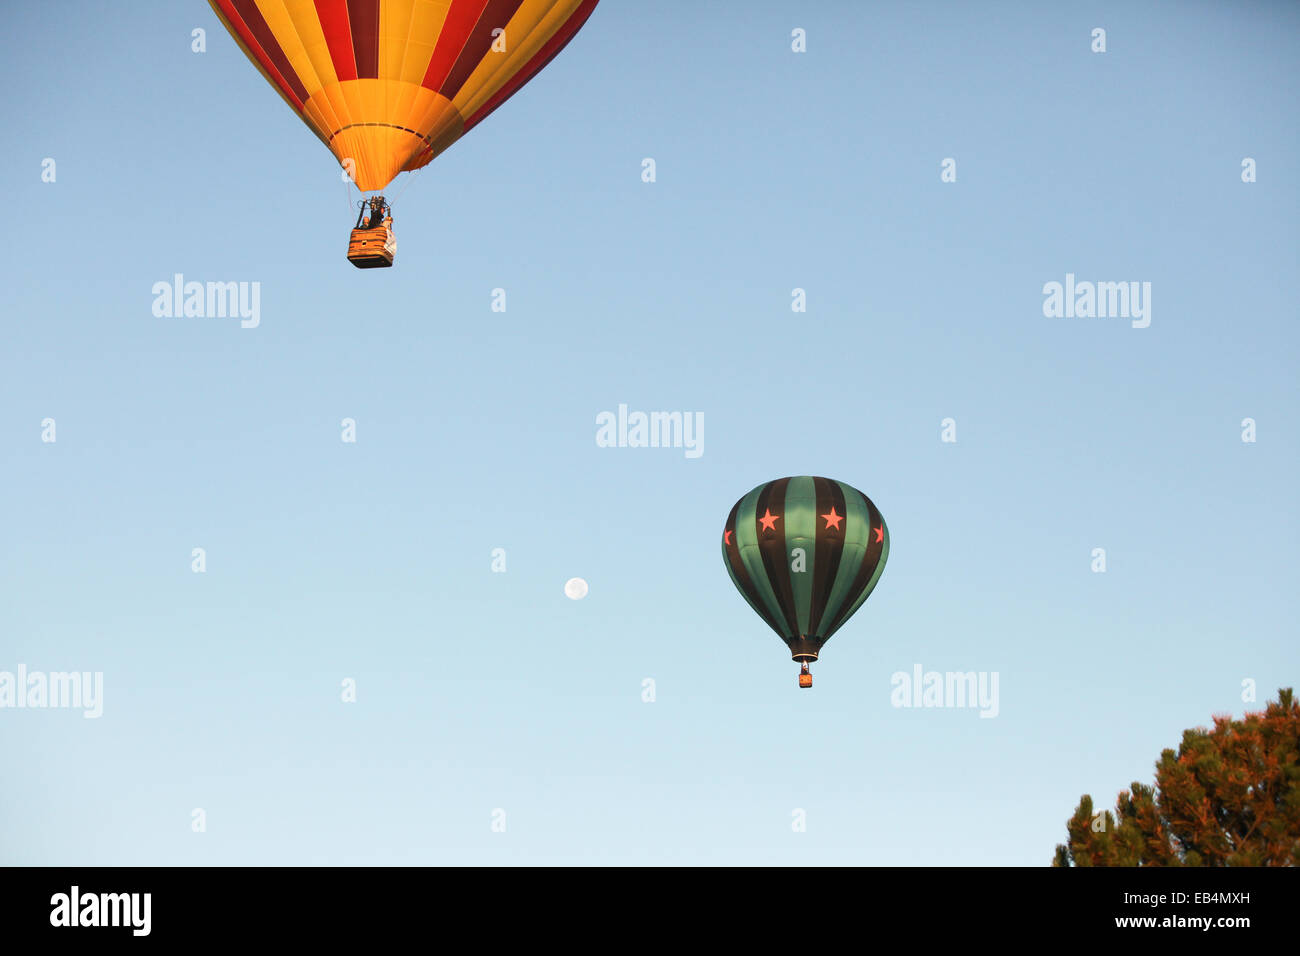 A few hot air balloons soar near trees with the moon as a backdrop against a clear sky. Stock Photo